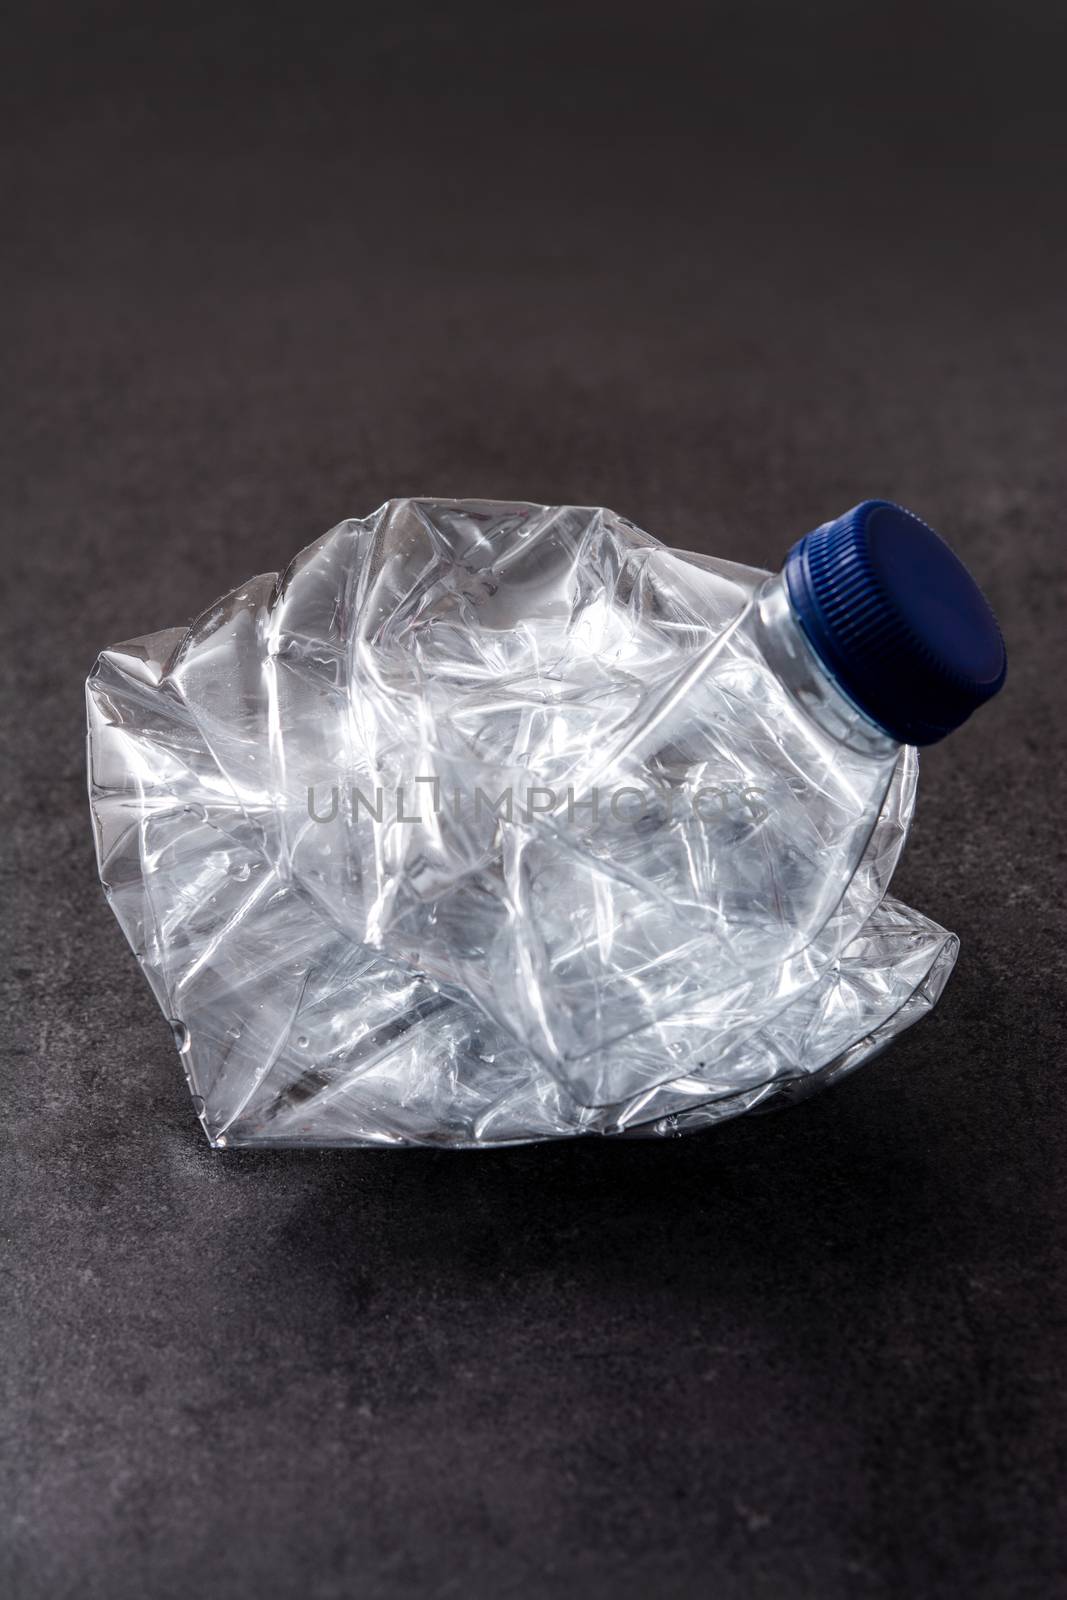 Disposable waste plastic bottle by chandlervid85